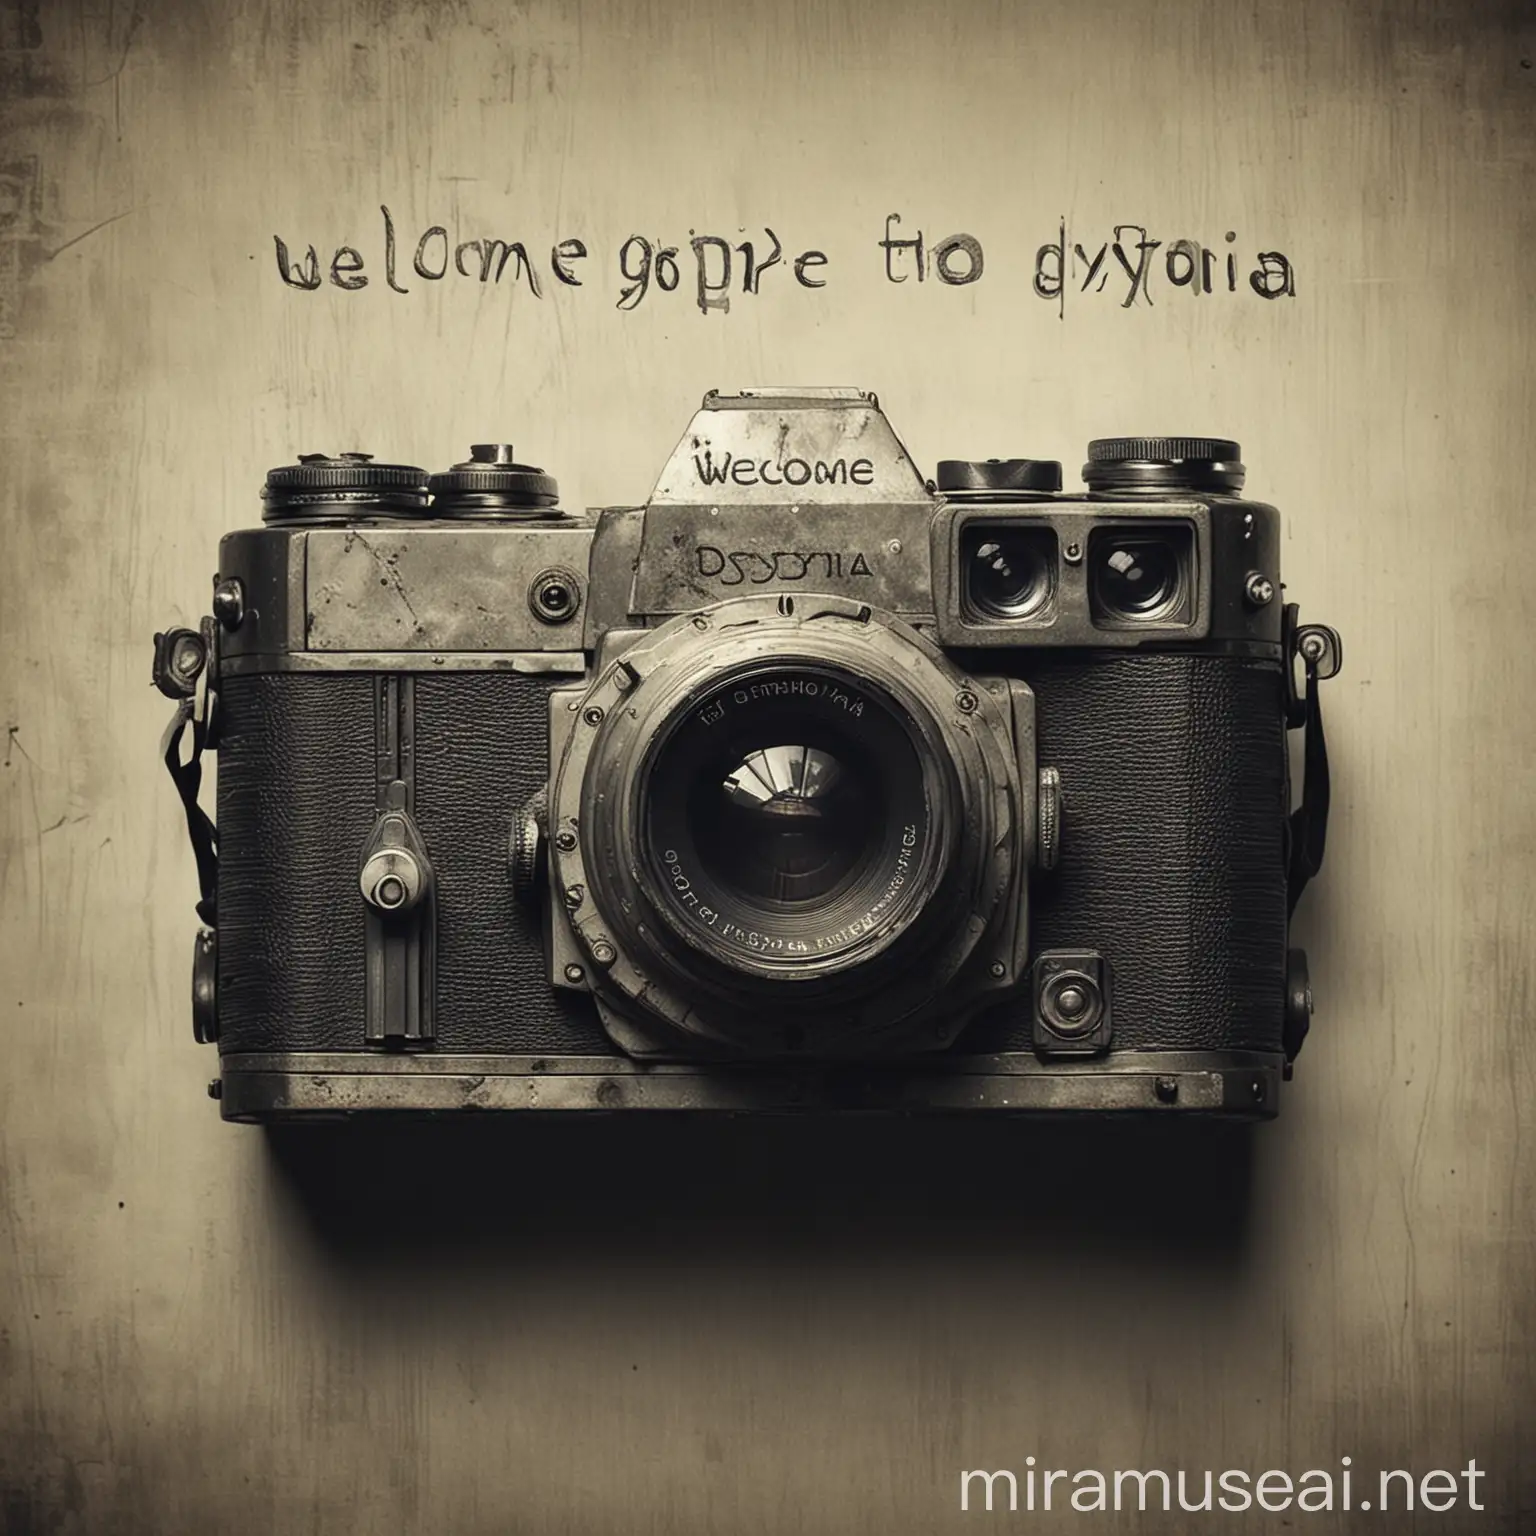 A Dystopia, writing: Welcome to Dystopia, a camera picture on it.